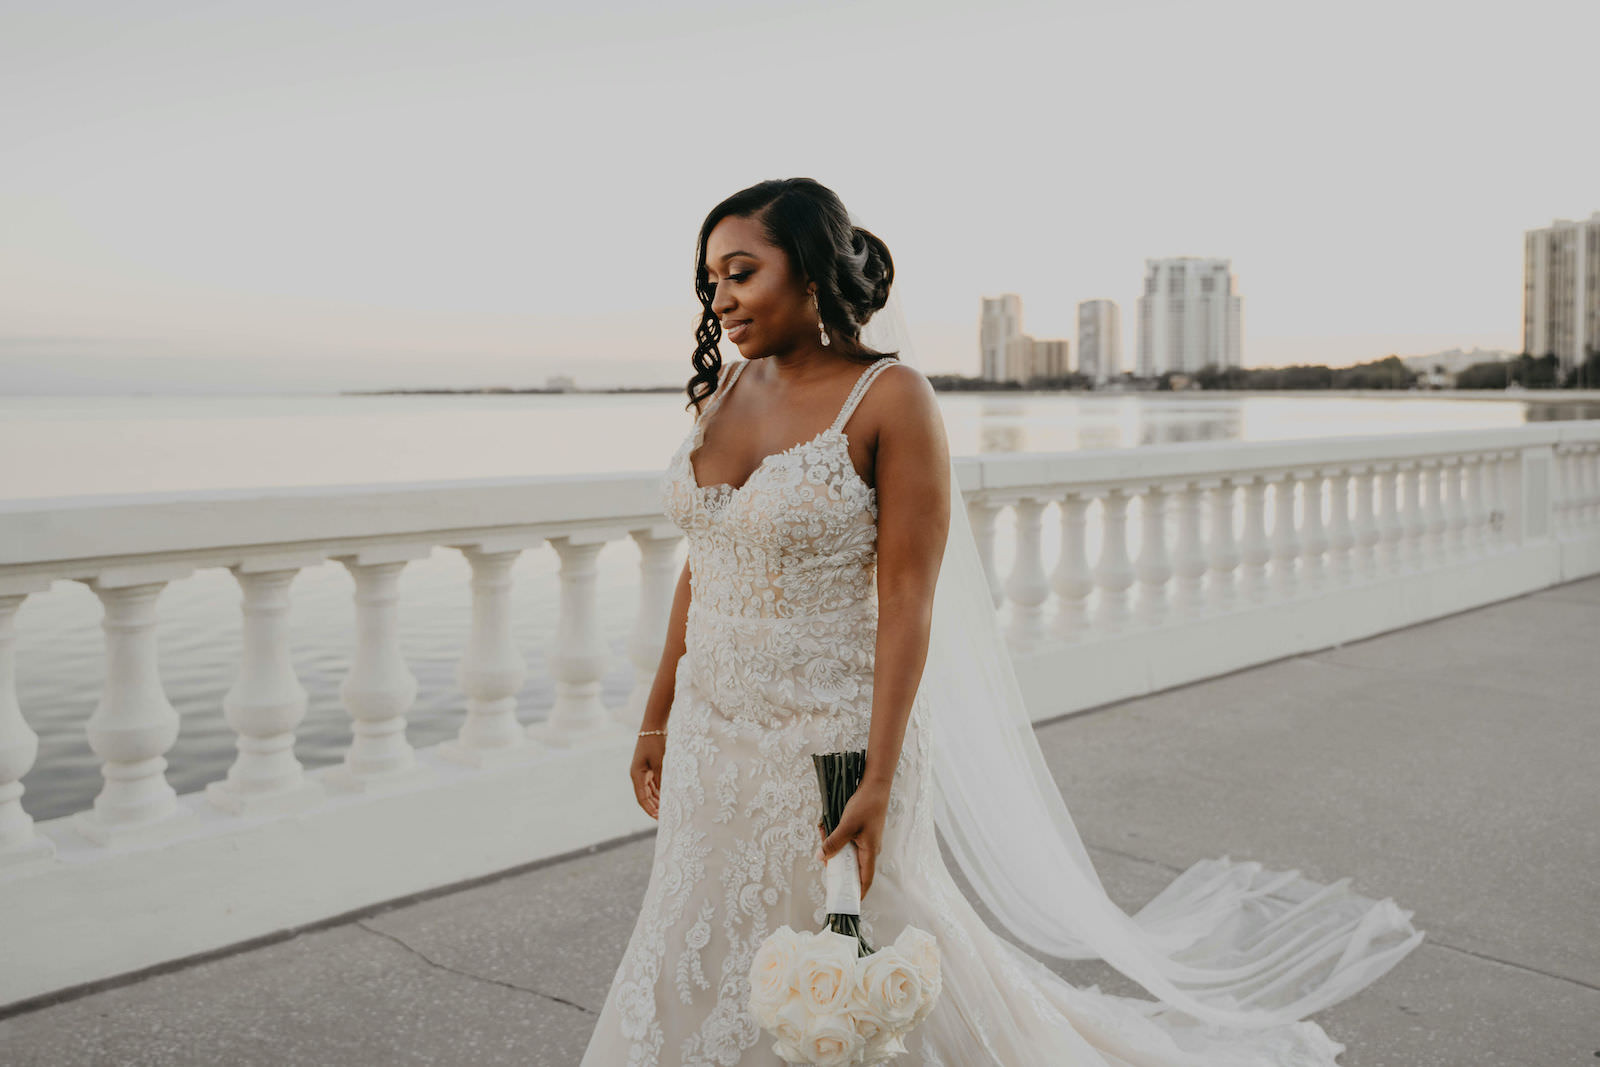 Outdoor Bridal Portrait on Bayshore | All White Rose Bridal Bouquet | Mori Lee Ivory Lace over Champagne Lining Spaghetti Strap V Neck Mermaid Bridal Gown with Long Cathedral Veil